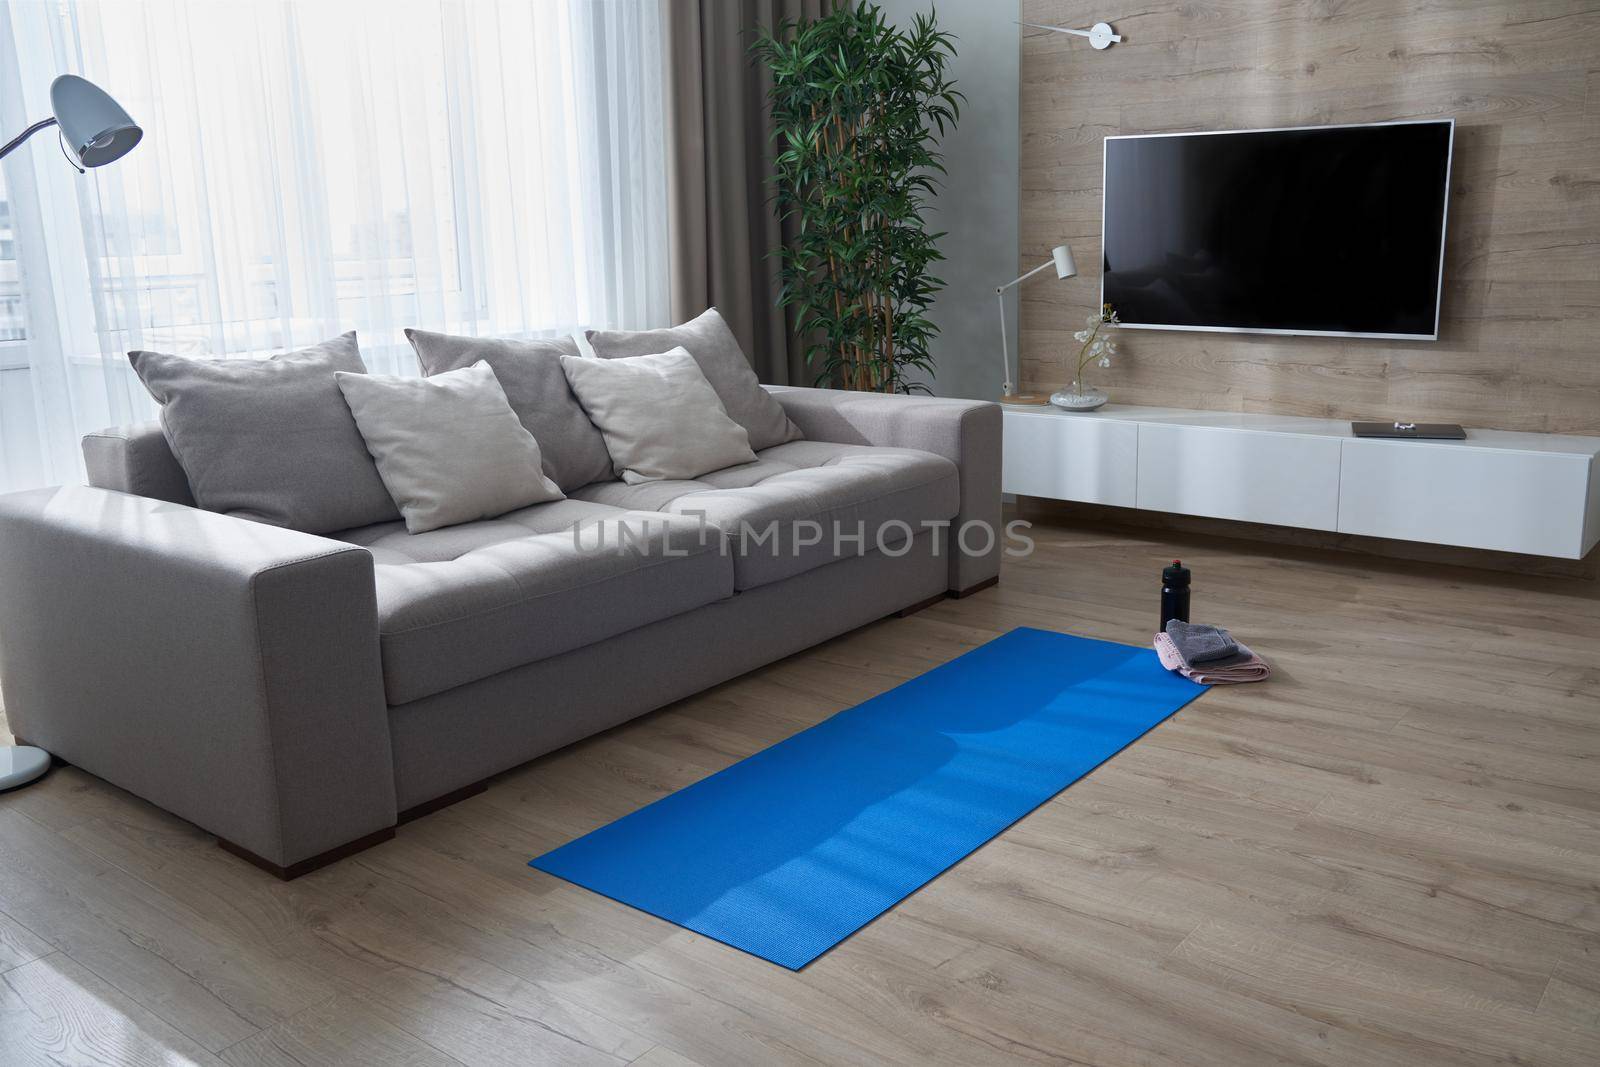 Yoga mat on the floor near couch in modern living room with no people. Healthy lifestyle and fitness concept by Mariakray